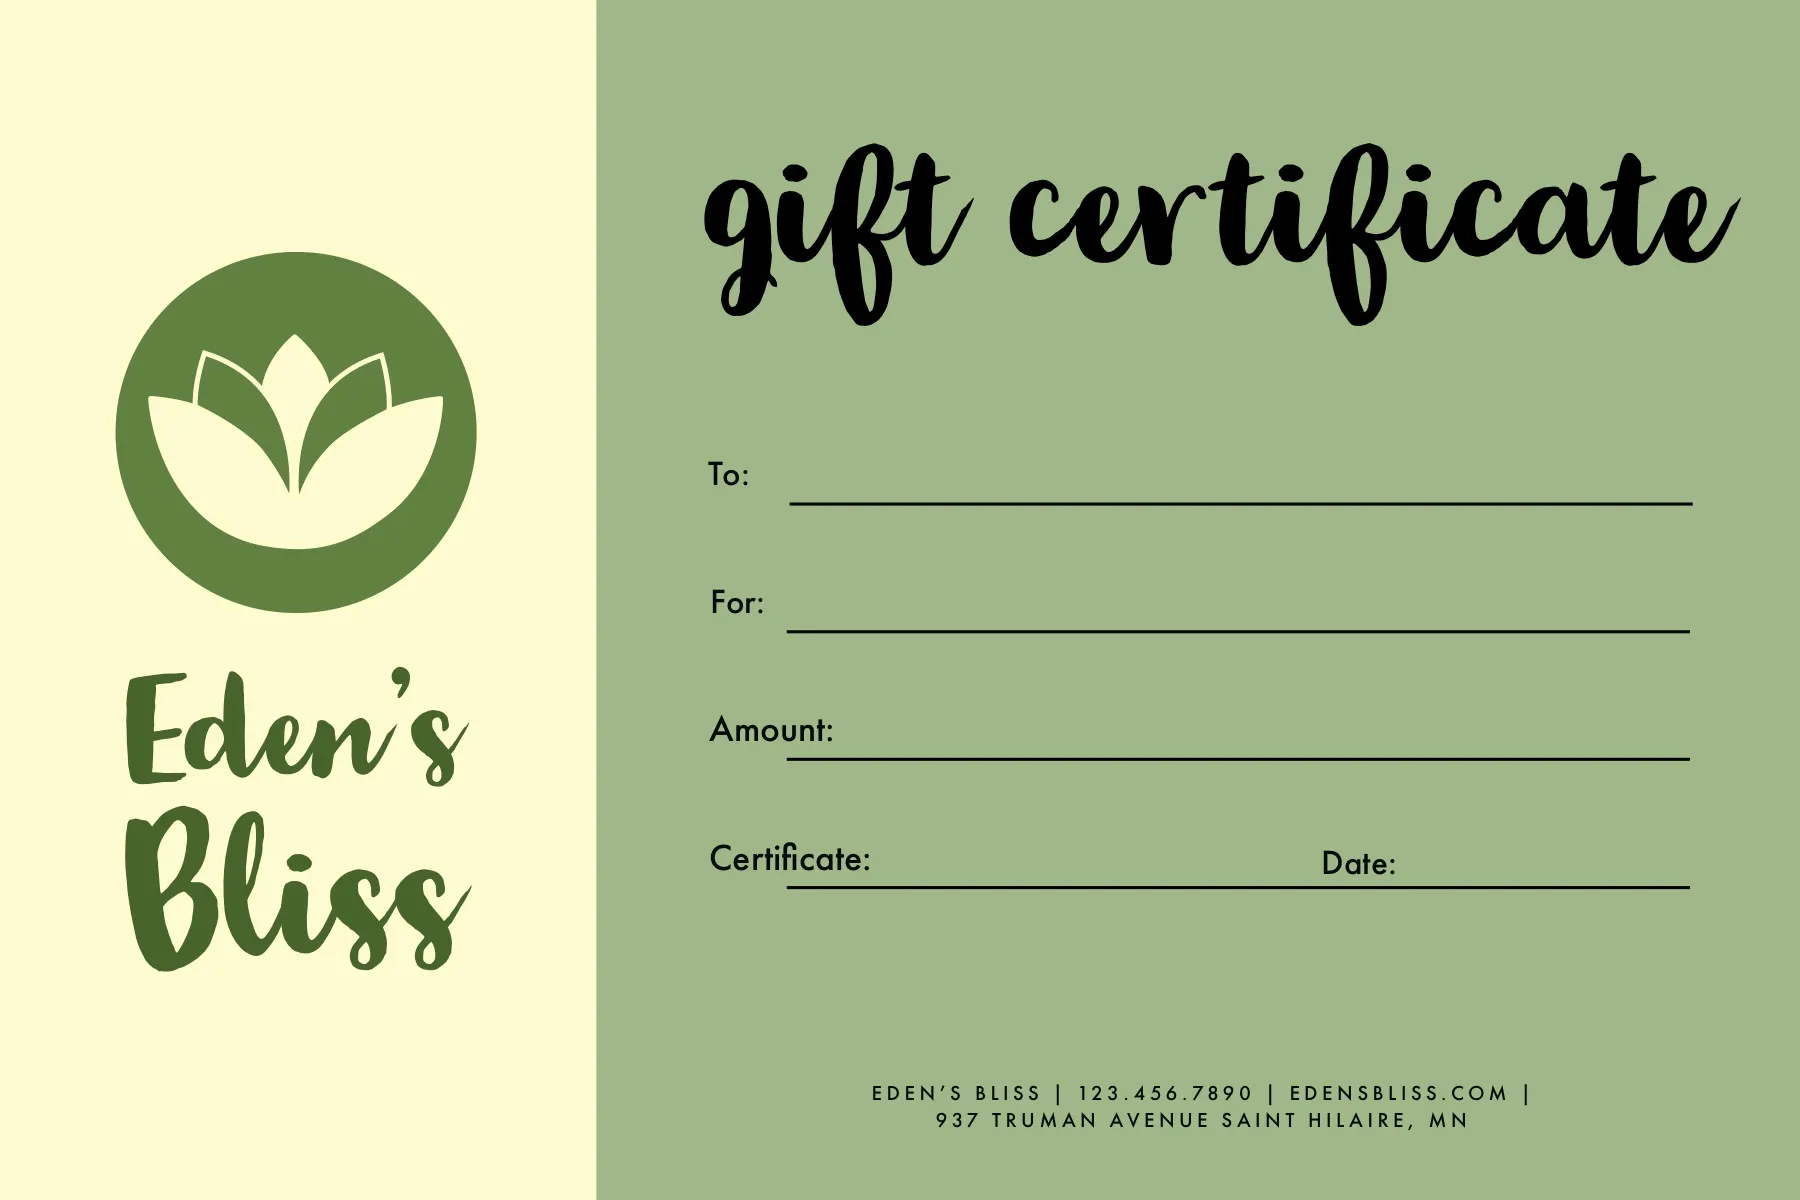 Free Gift Certificate Templates: Make Gift Certificates Online With Homemade Gift Certificate Template